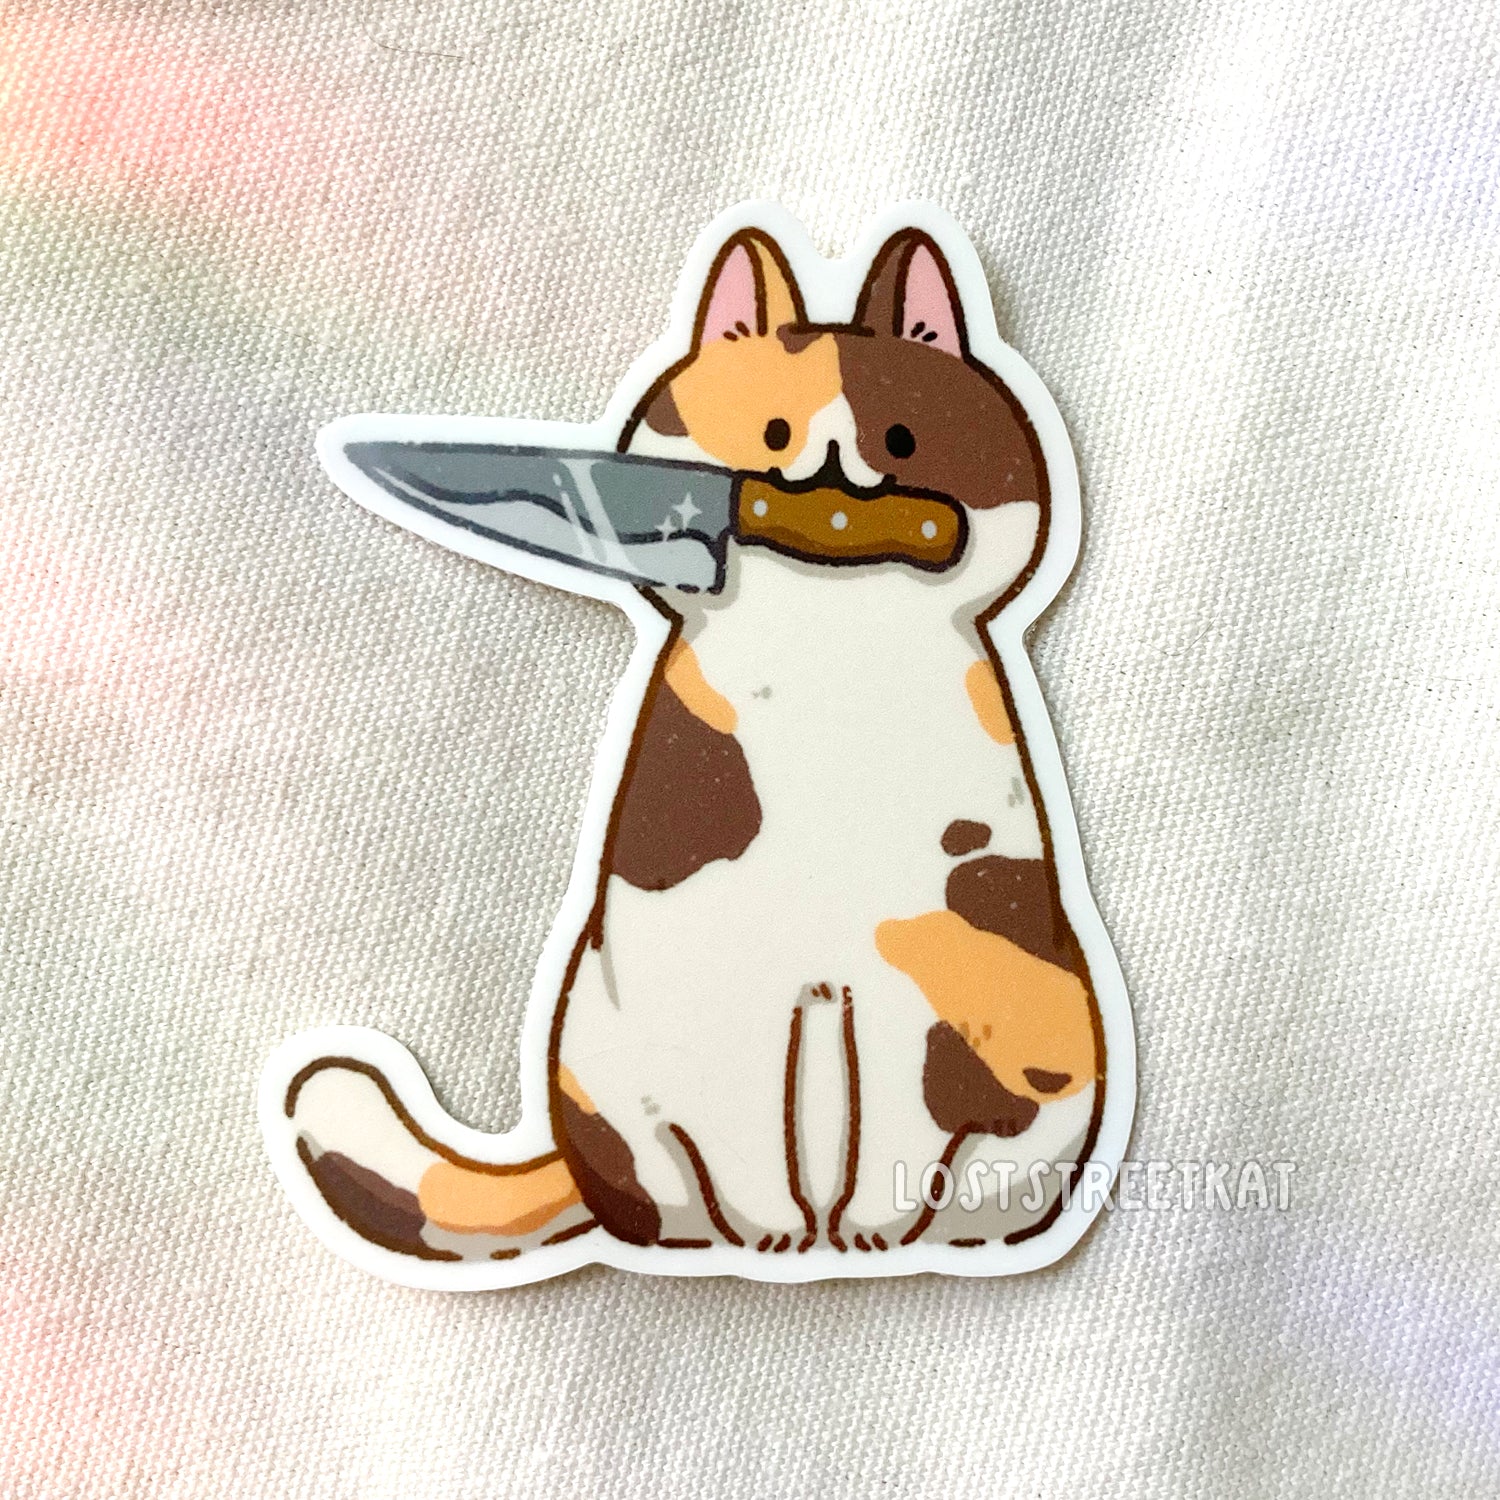 Sitting calico cat holding a knife in mouth vinyl sticker